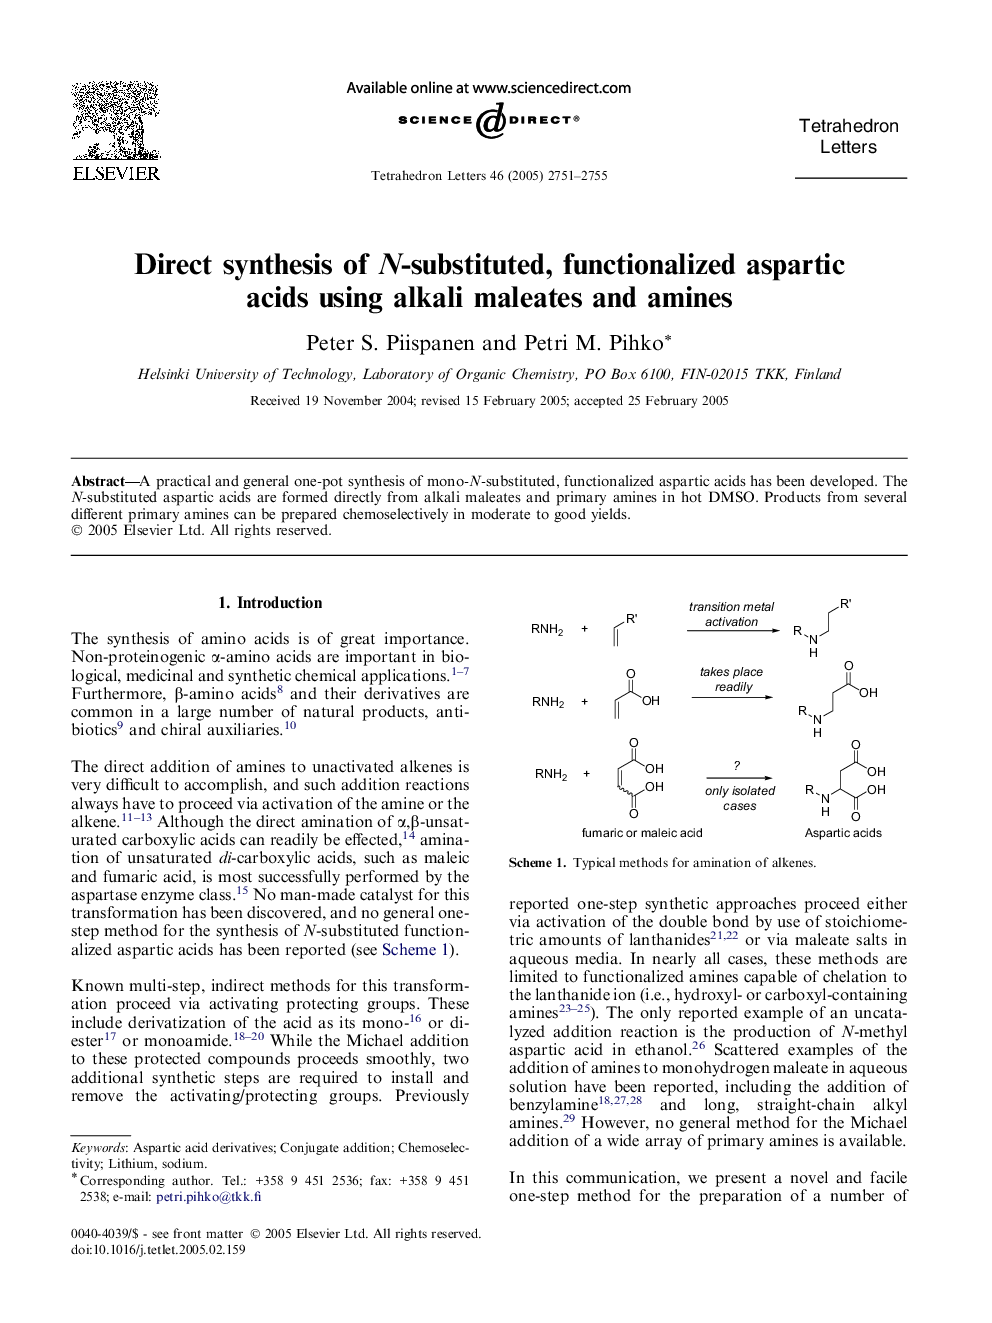 Direct synthesis of N-substituted, functionalized aspartic acids using alkali maleates and amines